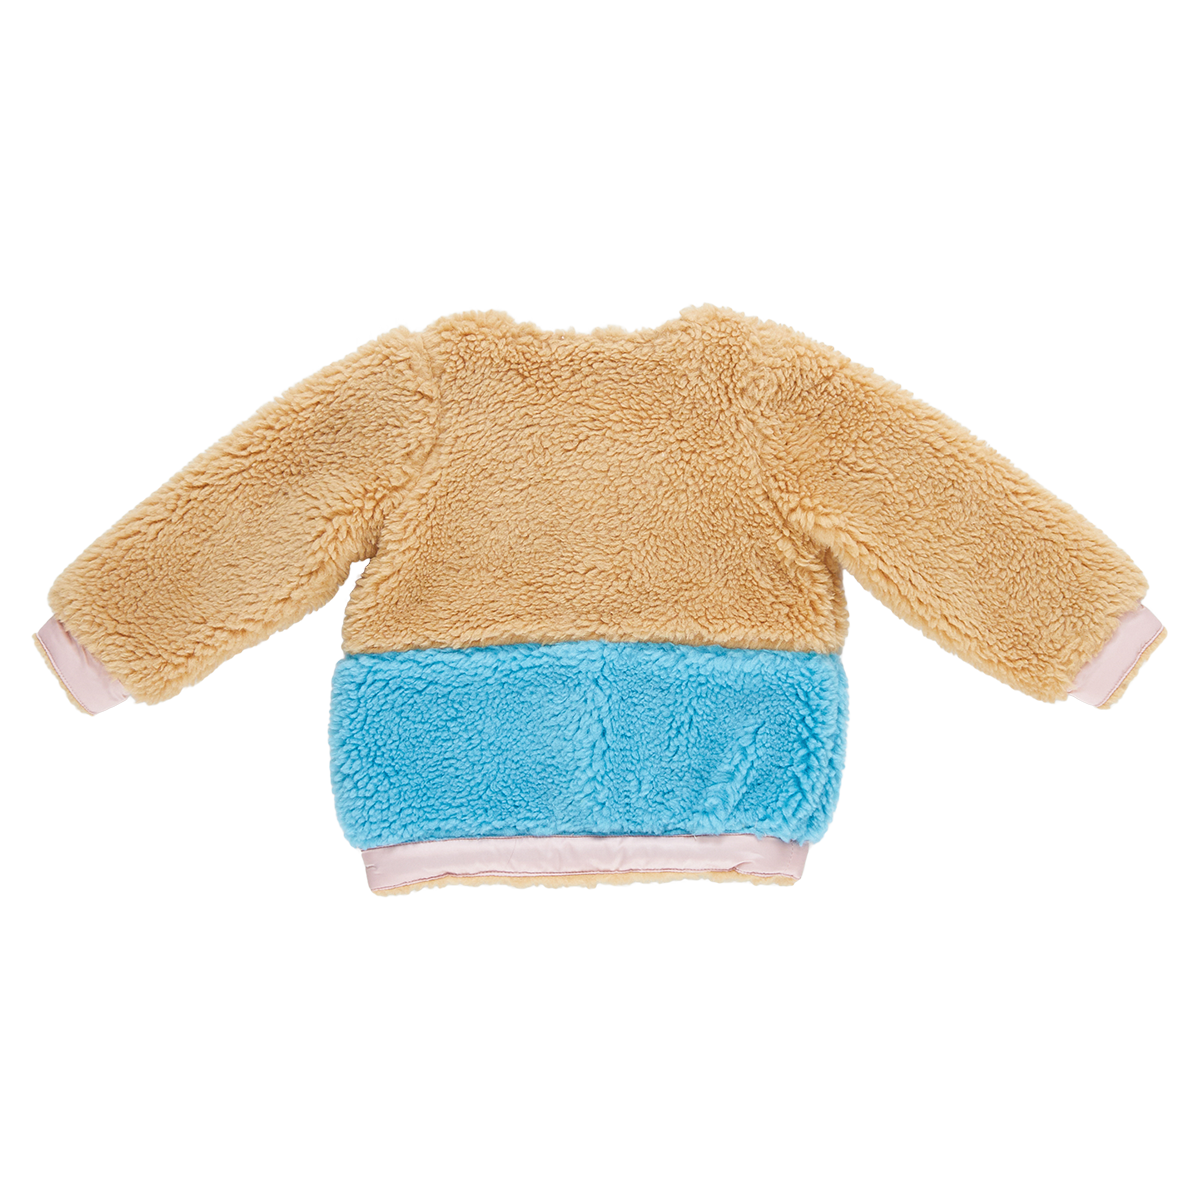 back of coloblock teddy coat with brown, blue and pink patches